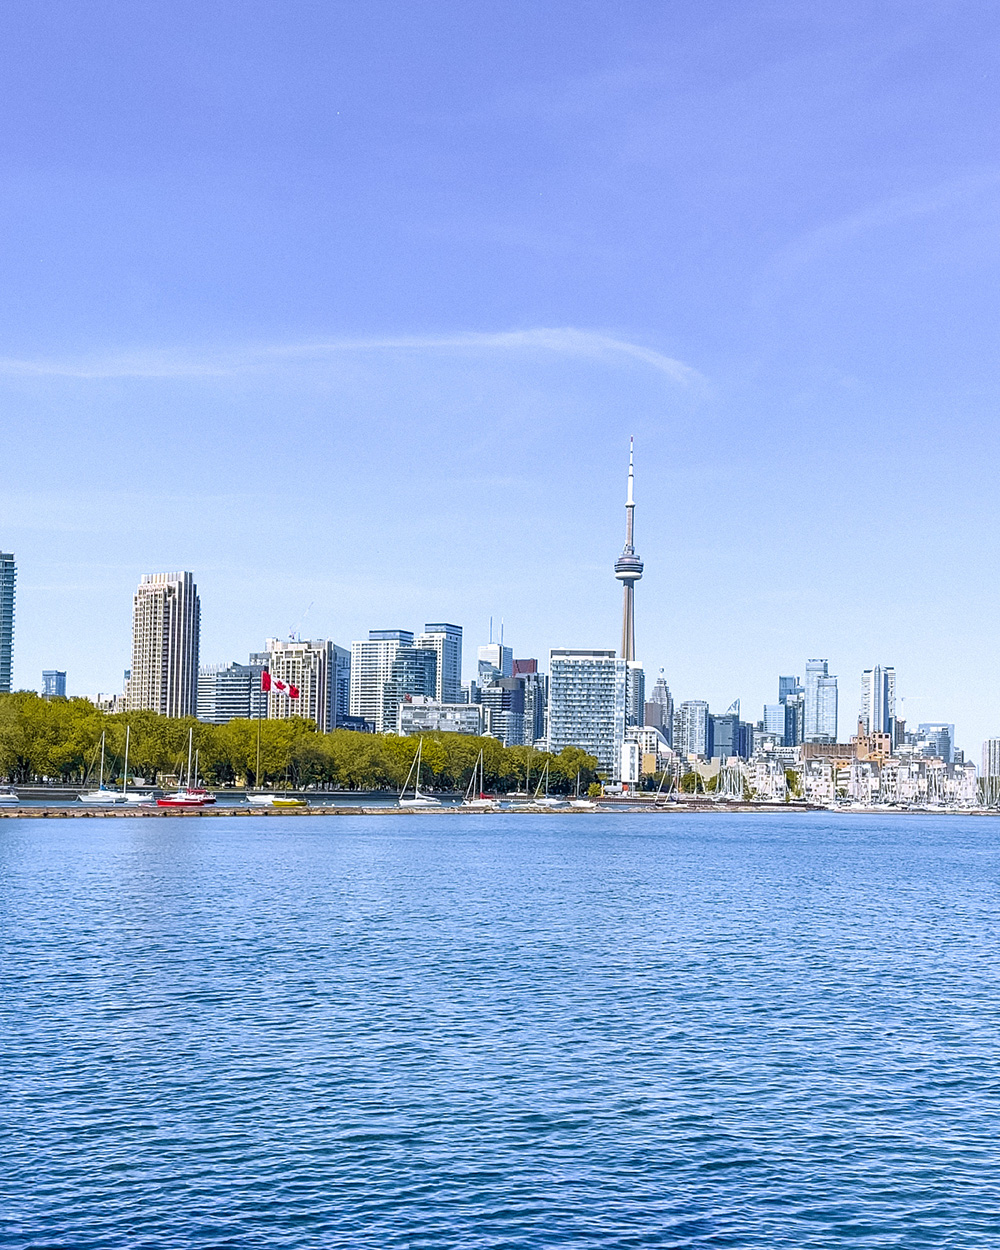 Looking for an incredible place to enjoy your next picnic in Toronto? This guide features some of the best picnic spots in Toronto from a local's perspective. Whether you're looking to picnic in a park, to spend your day sunning and snacking on a beach, prefer a garden hang, or want to check out a more unique destination, this guide has all of the best picnic spots for you to choose from. Pictured here: Trillium Park